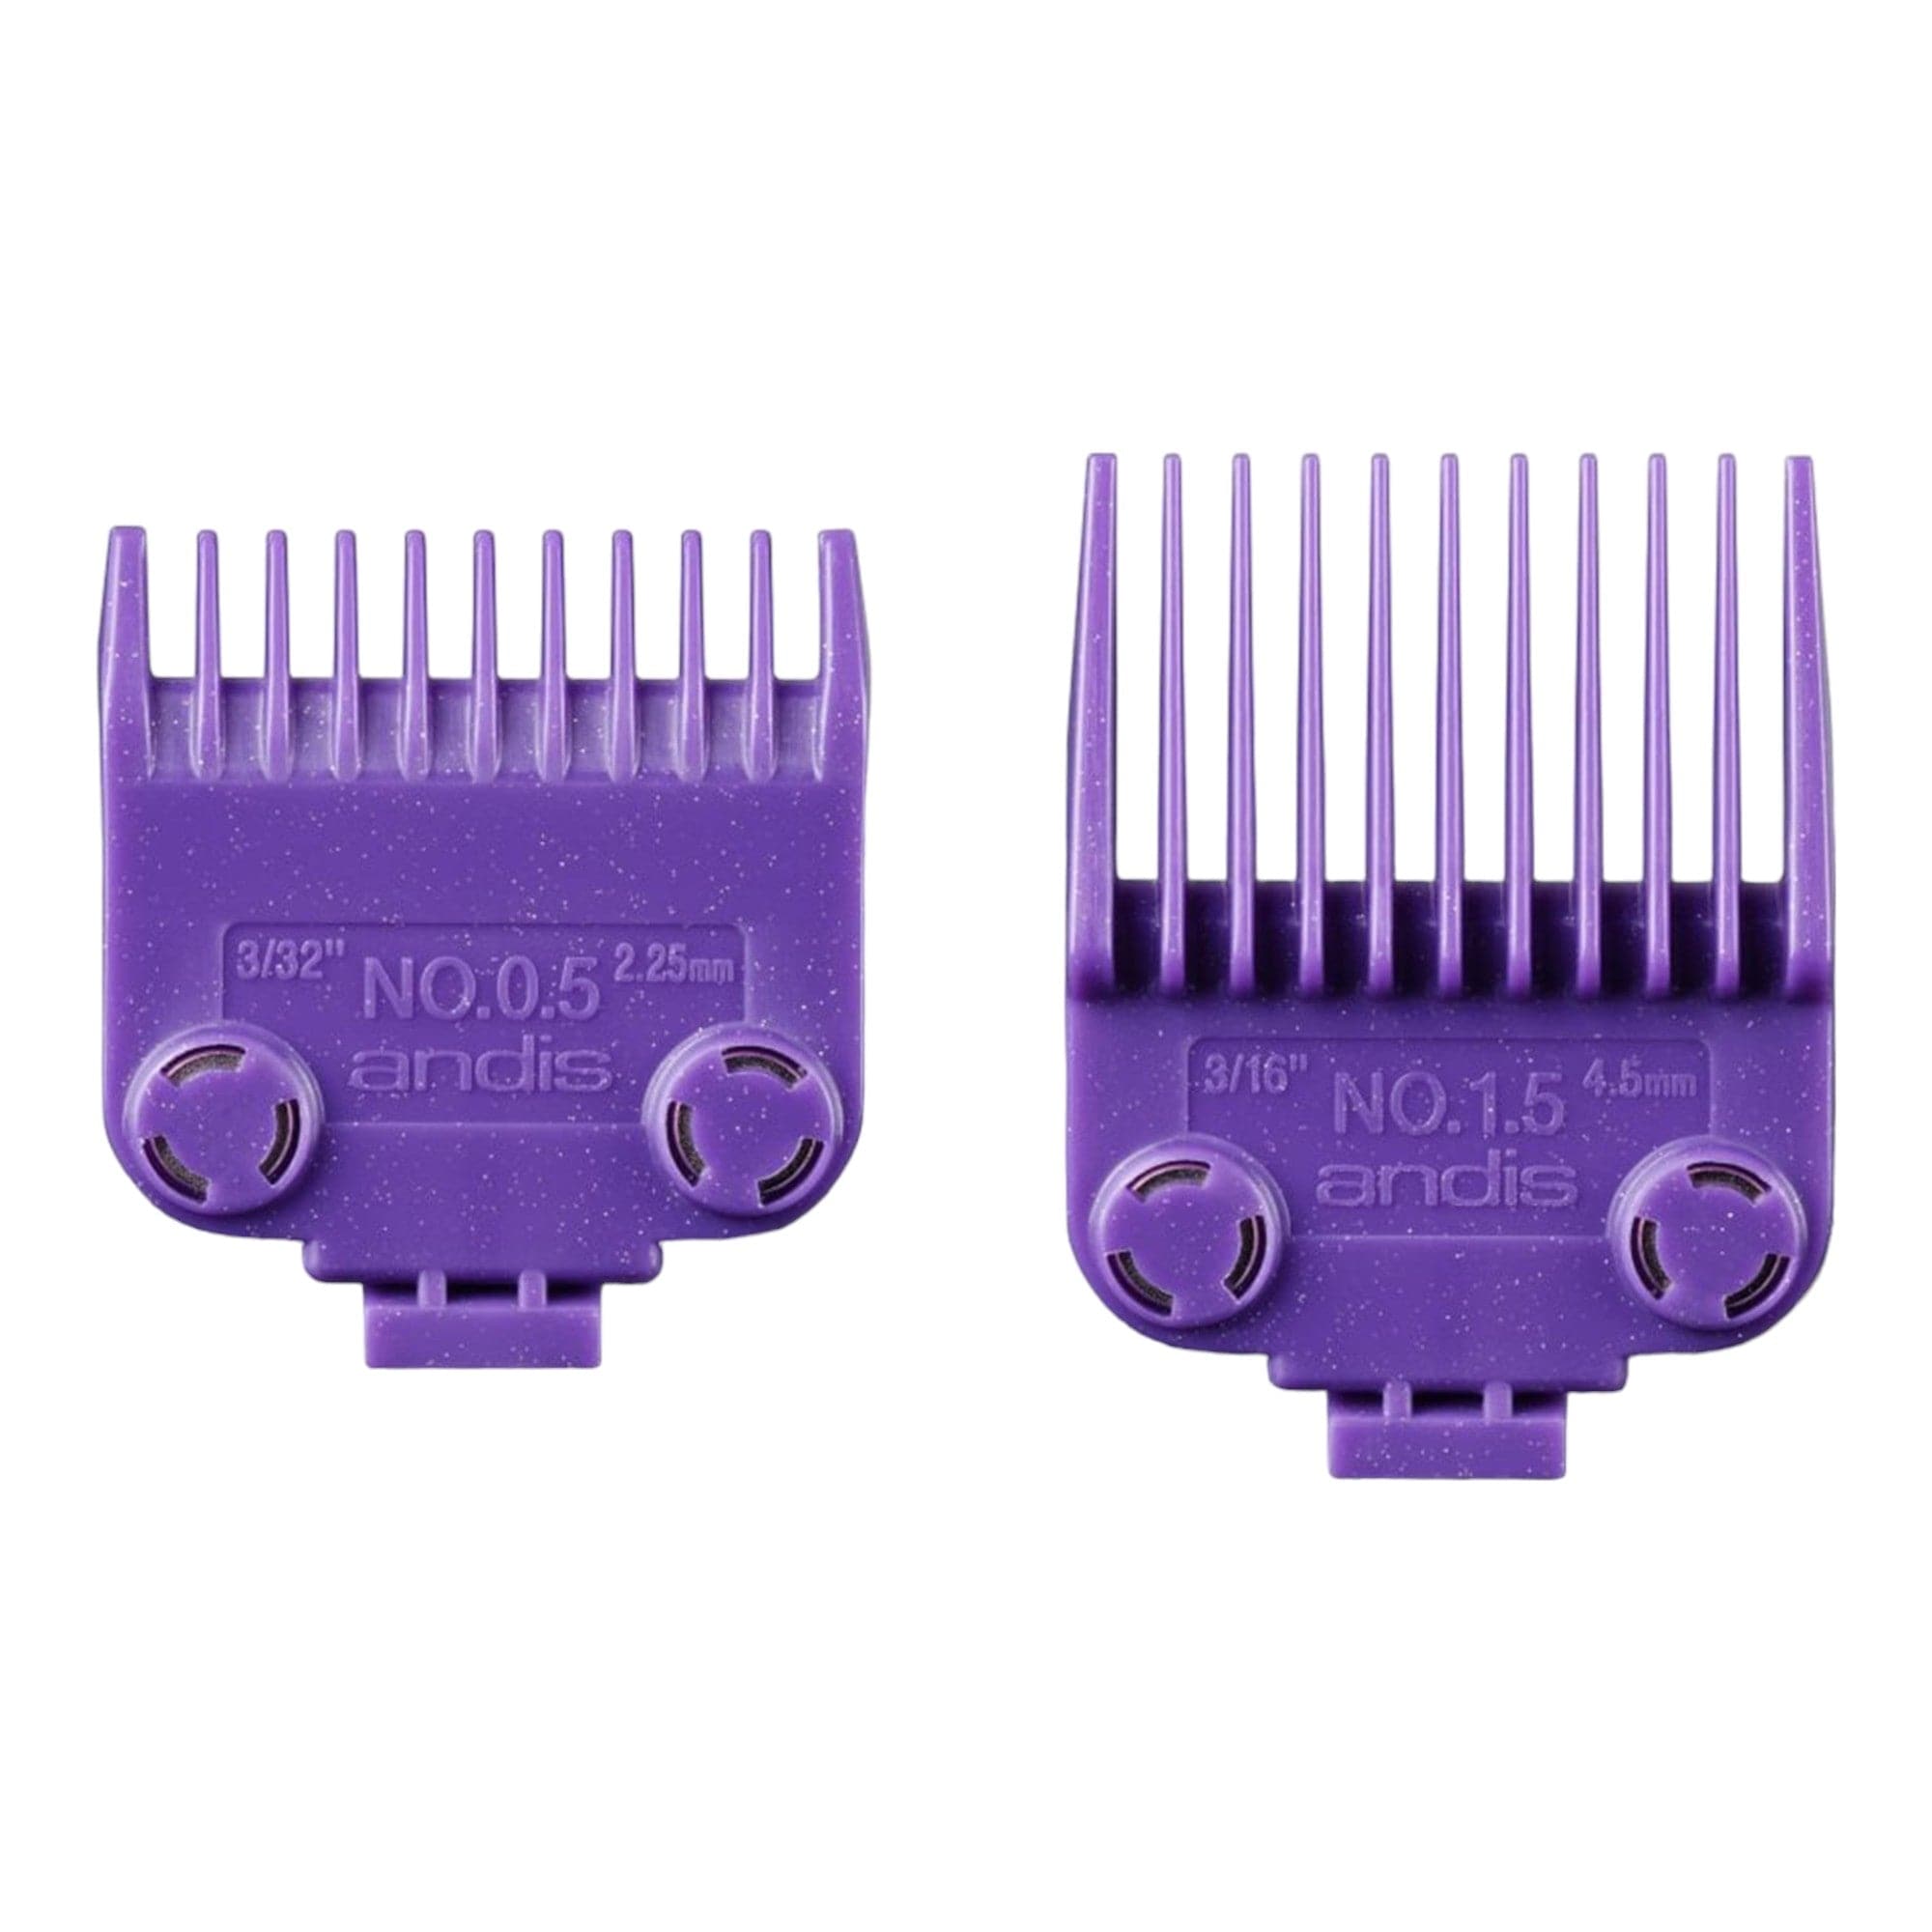 Andis - Master Magnetic Comb Set - Dual Pack 0.5 & 1.5 01420